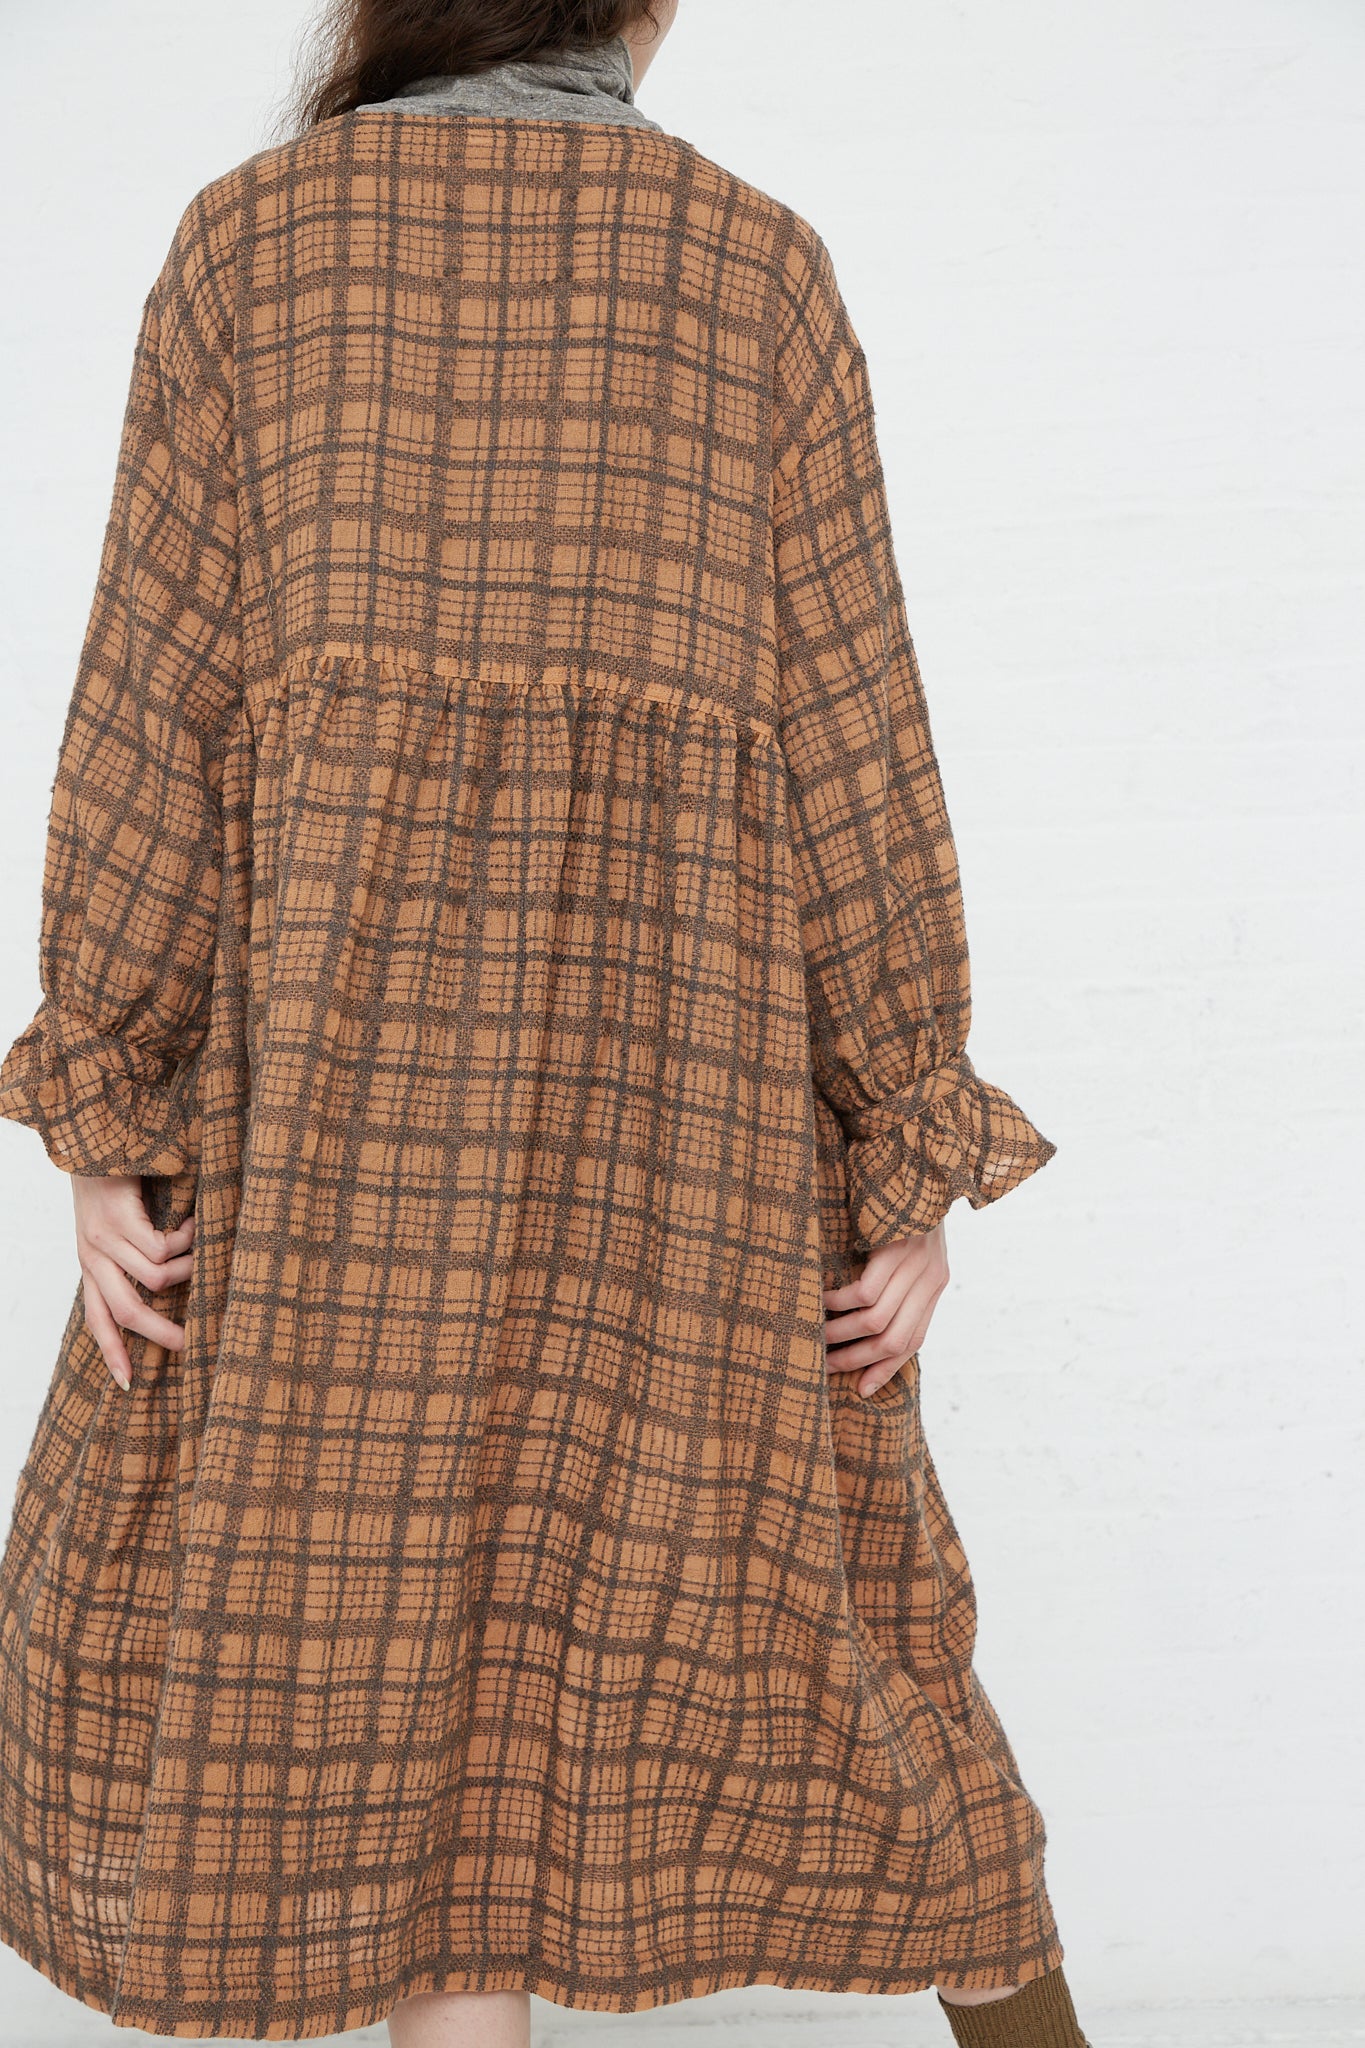 The woman is seen from the back, showcasing her beautiful and stylish Woven Wool Check Dress in Terracotta by Ichi Antiquités.